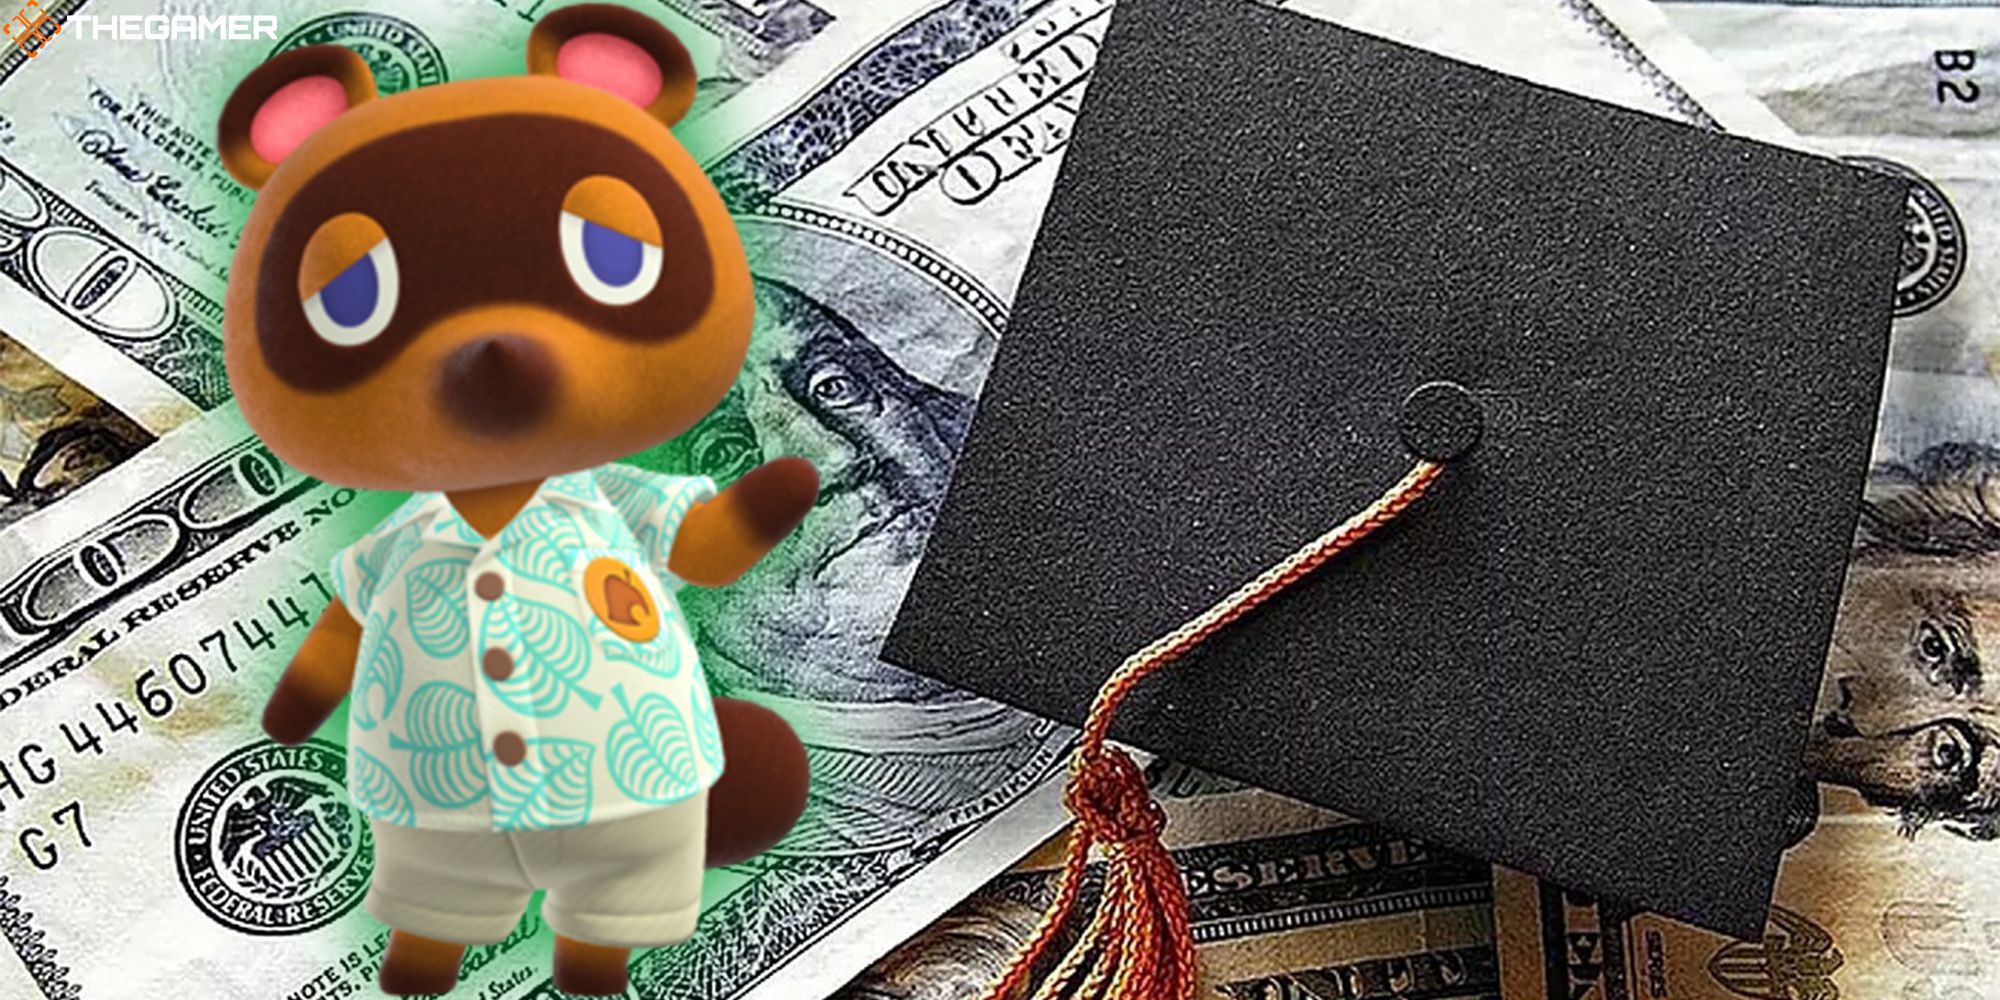 Tom Nook stands in front of a pile of hundred dollar bills and a graduation cap. Custom image for TG.